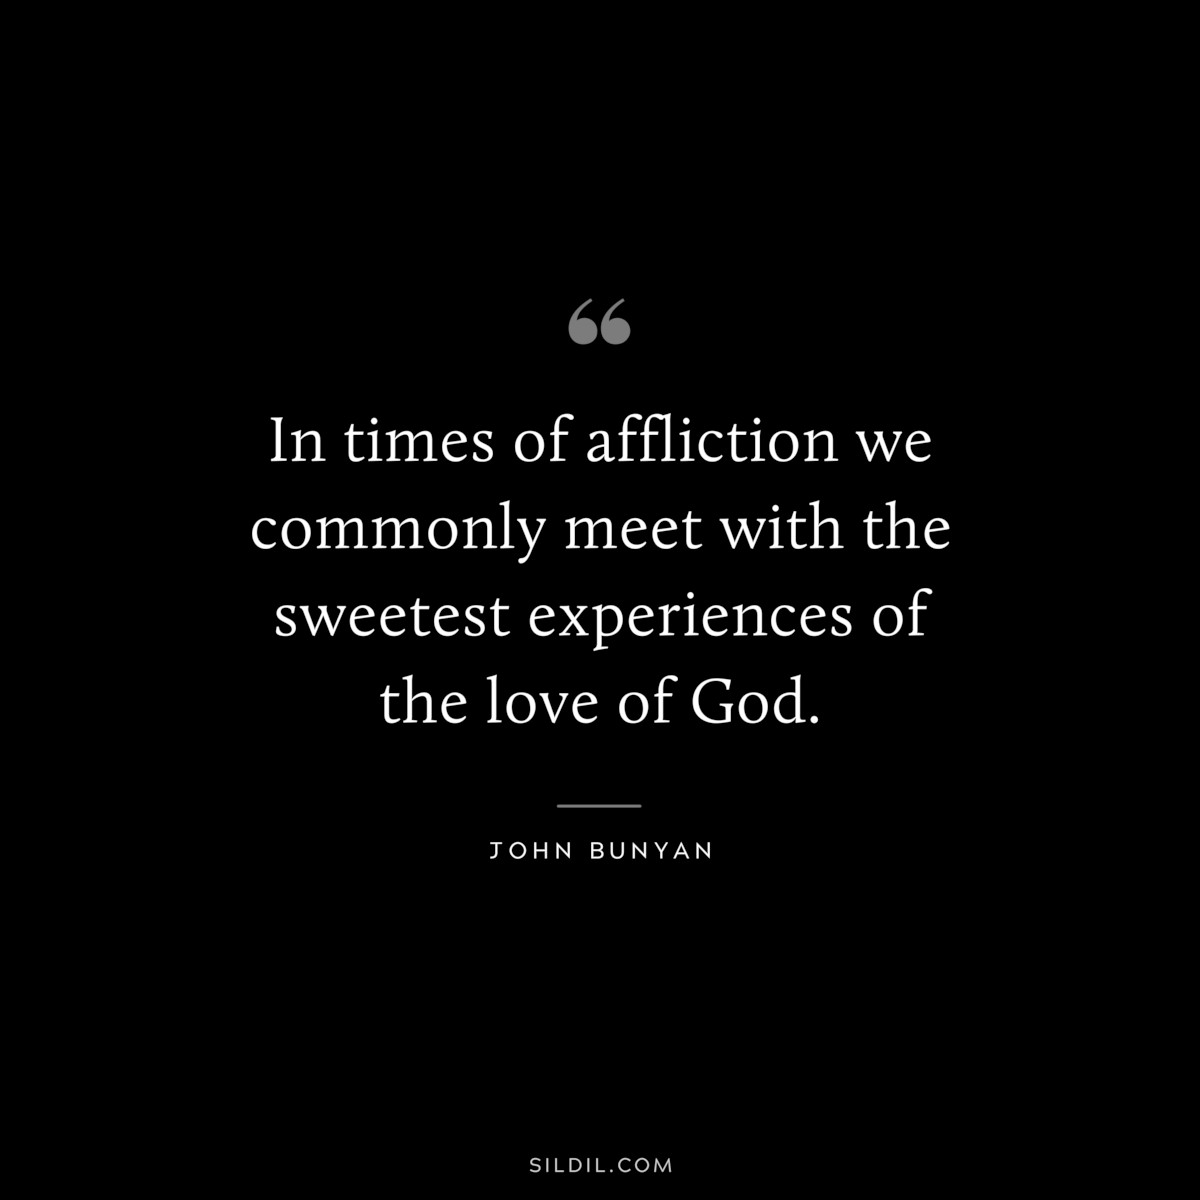 In times of affliction we commonly meet with the sweetest experiences of the love of God. ― John Bunyan